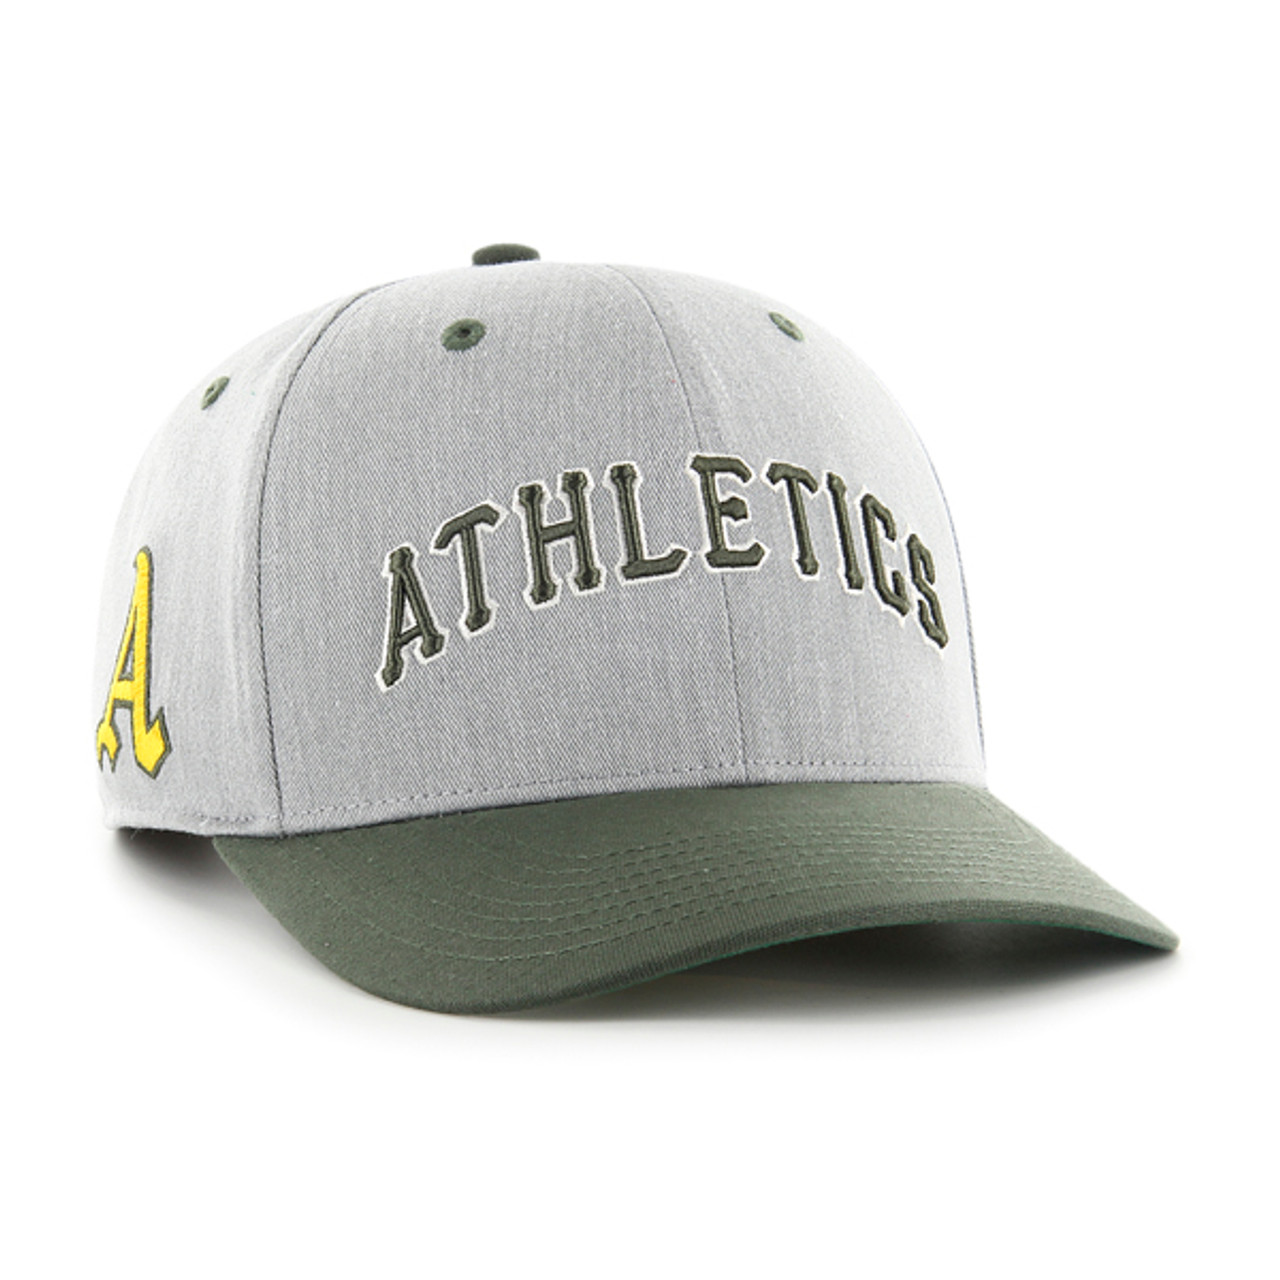 Men's '47 Brand Oakland Athletics Cooperstown Collection Fly Out Adjustable  Cap